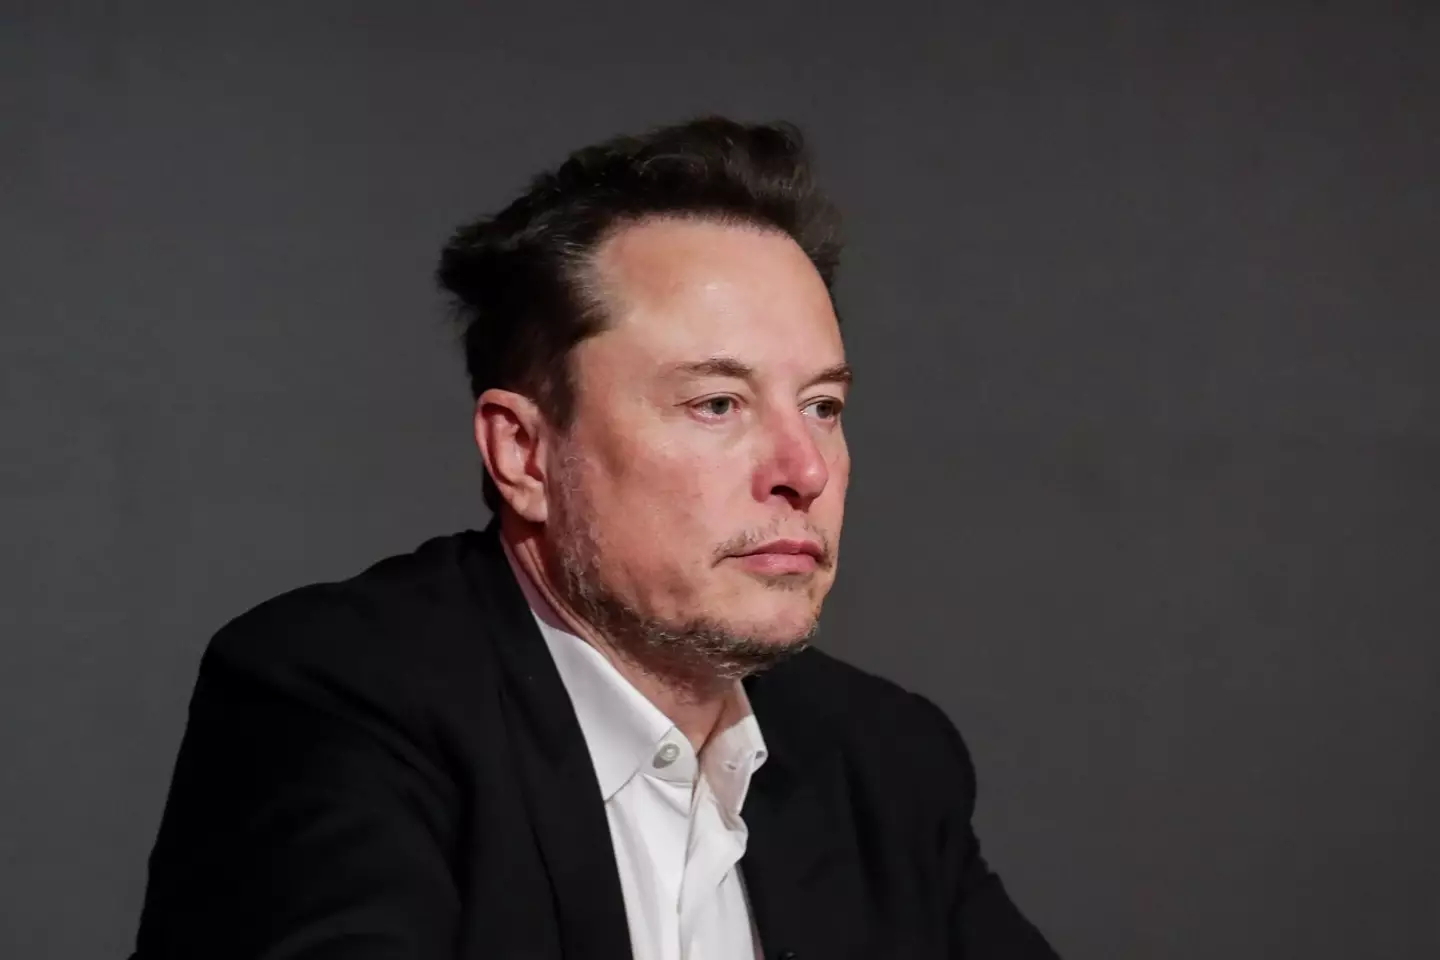 Elon Musk has revealed the one question he asks during every job interview so he can catch out the liars.